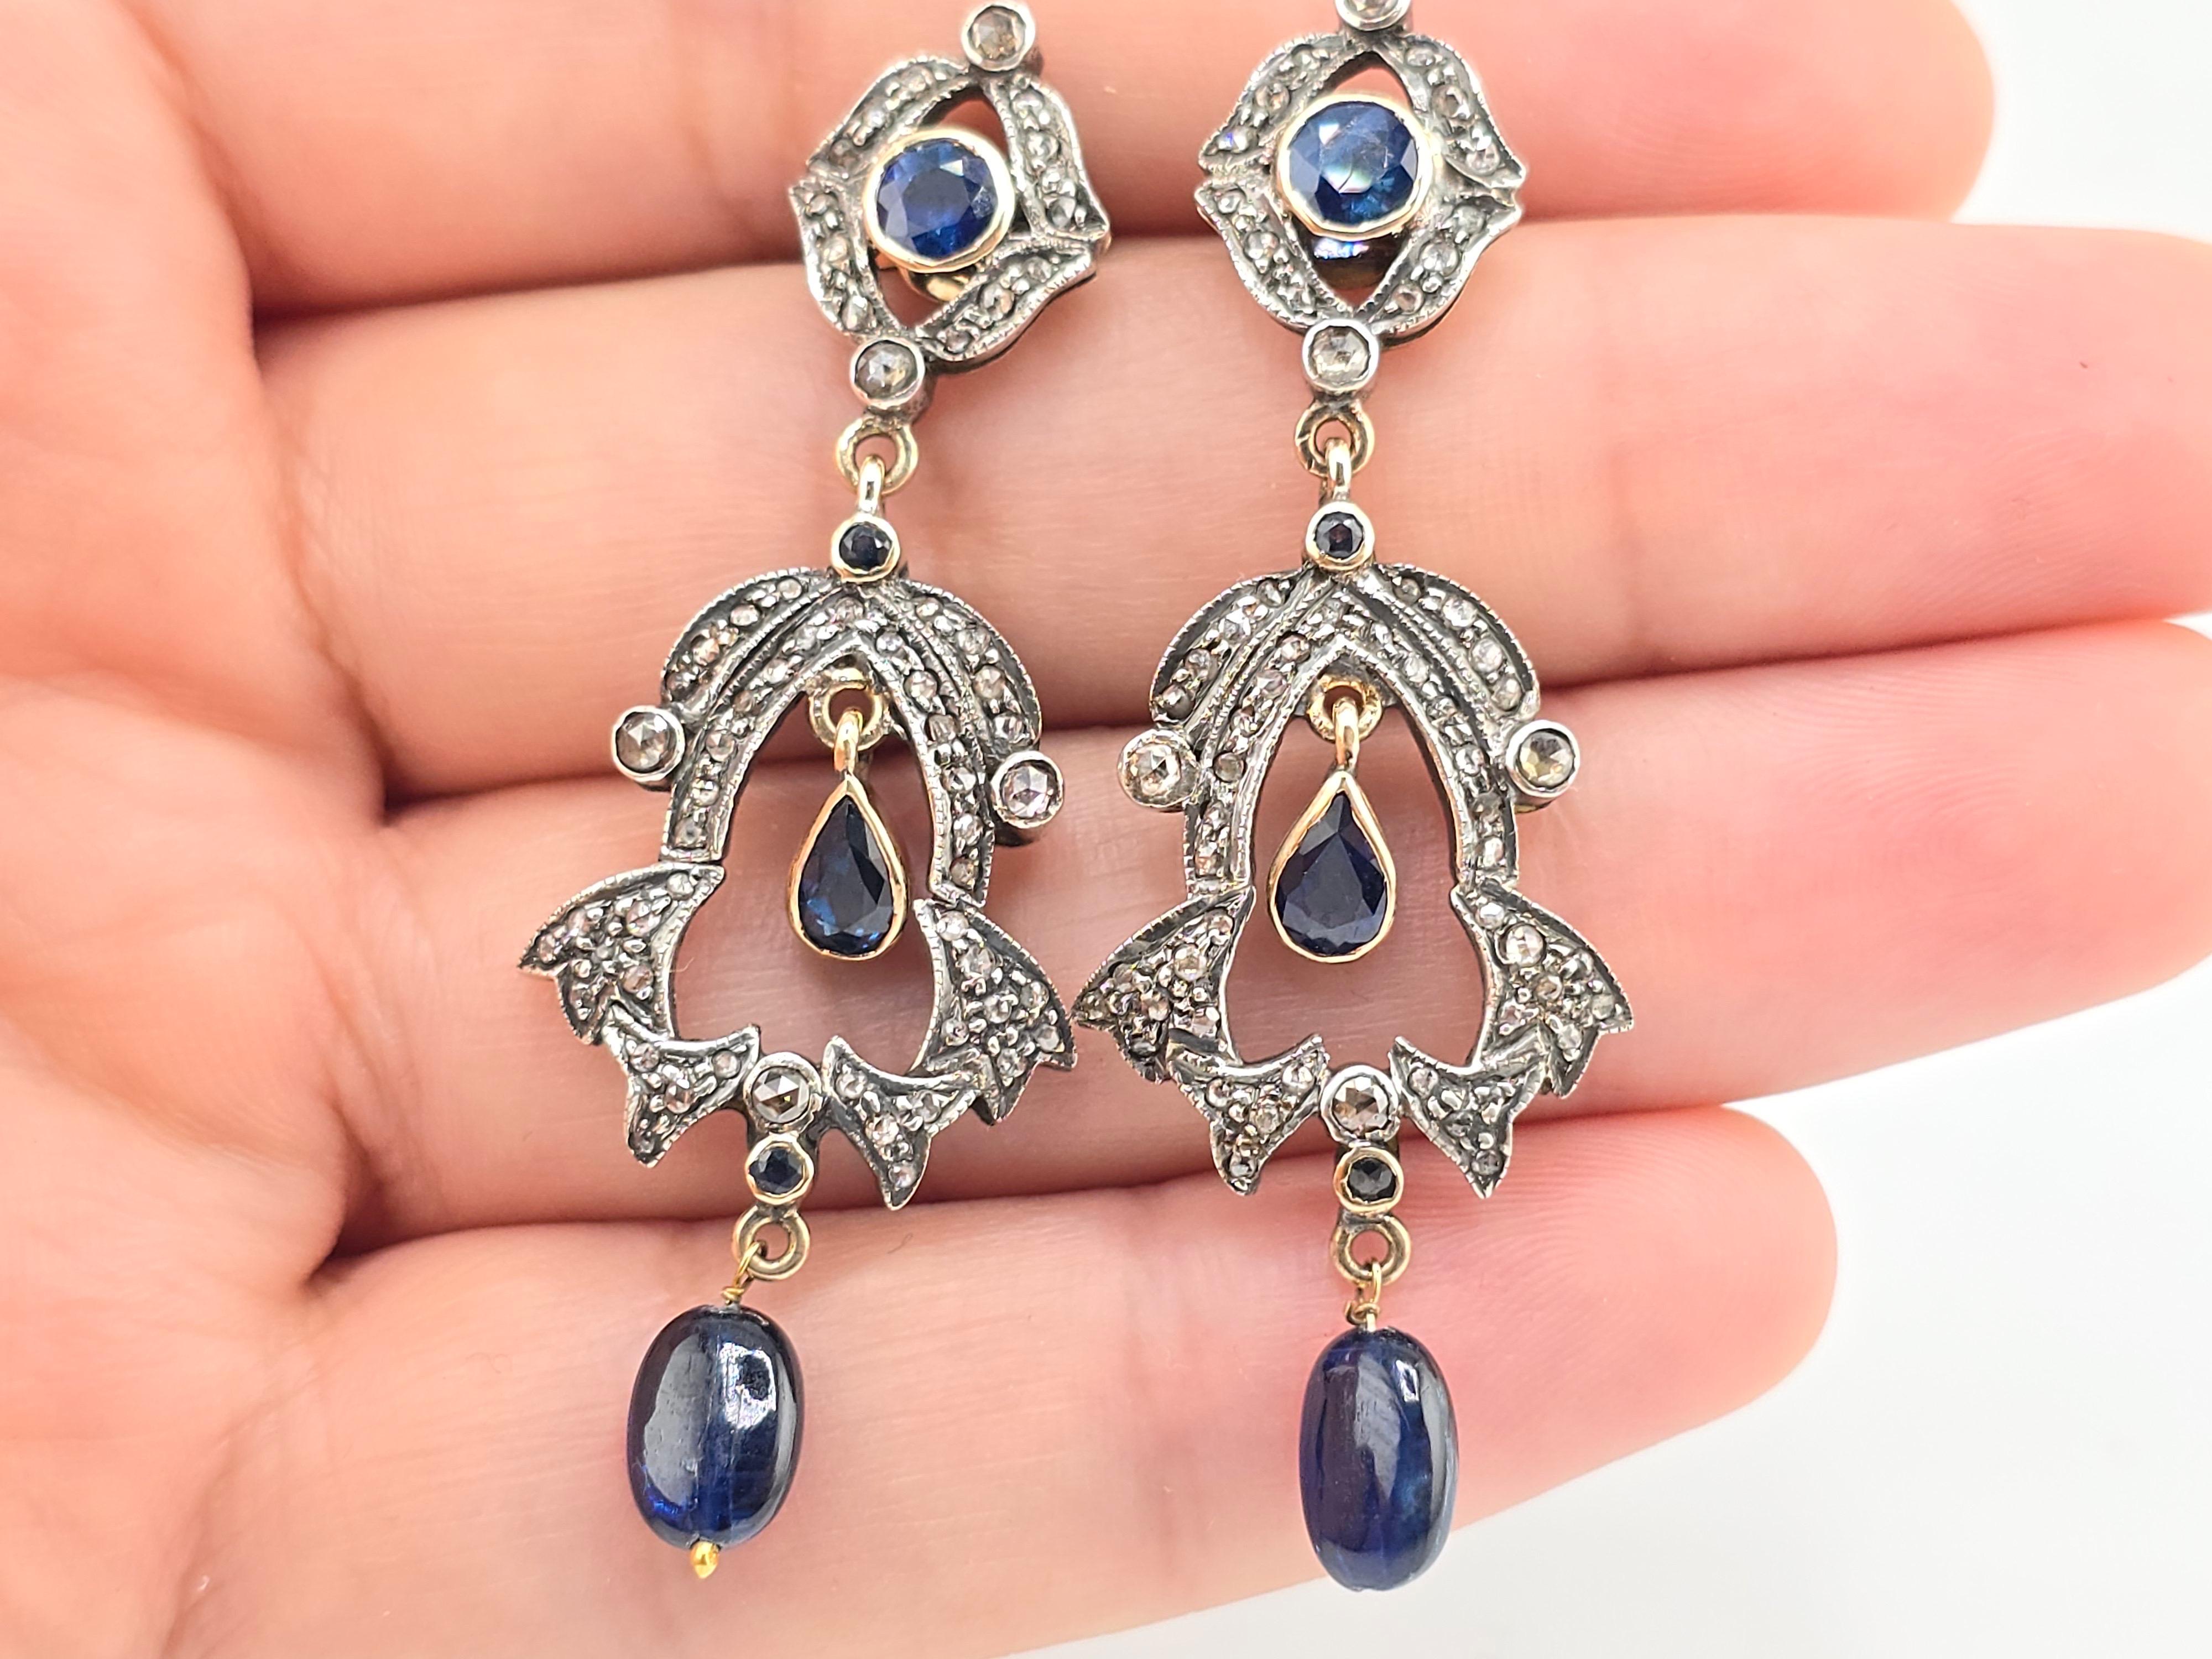 Round Cut Rare Pair Of Victorian Diamond & Sapphire Earrings 14K & Sterling For Sale